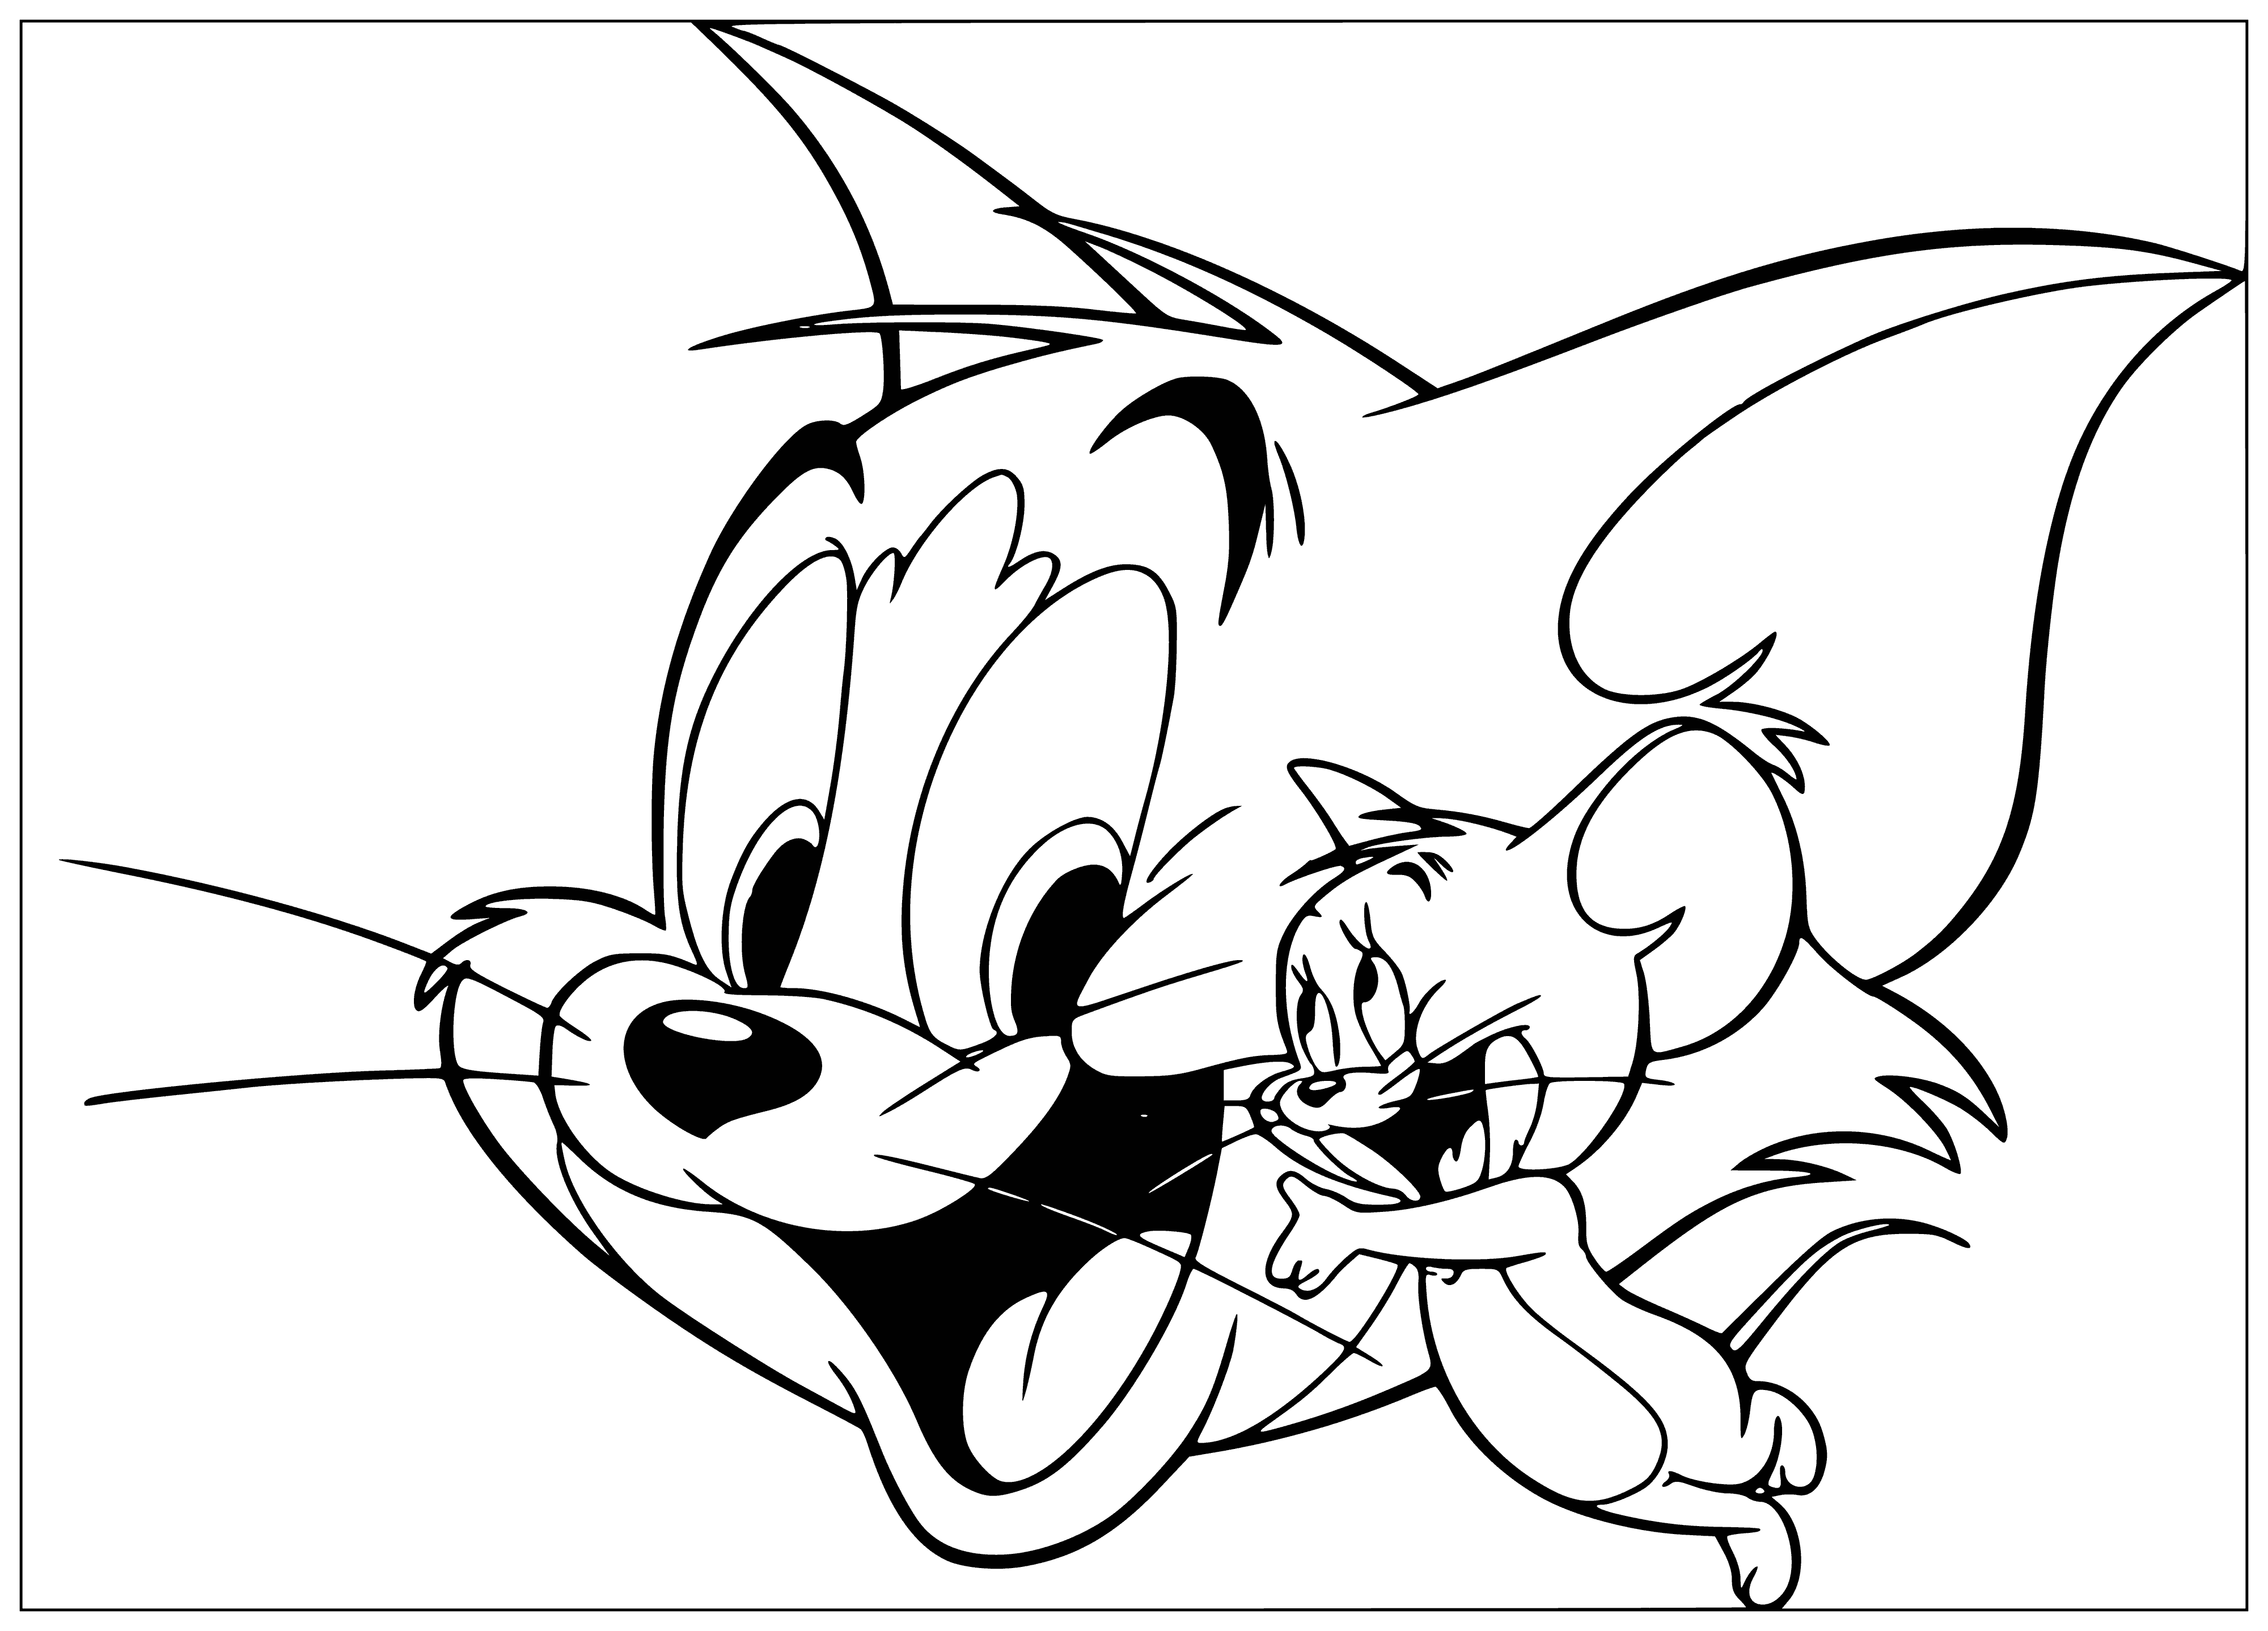 coloring page: Tom and Jerry are engaged in a heated fight in a kitchen, with the cat wielding a bat and the mouse biting his hand.